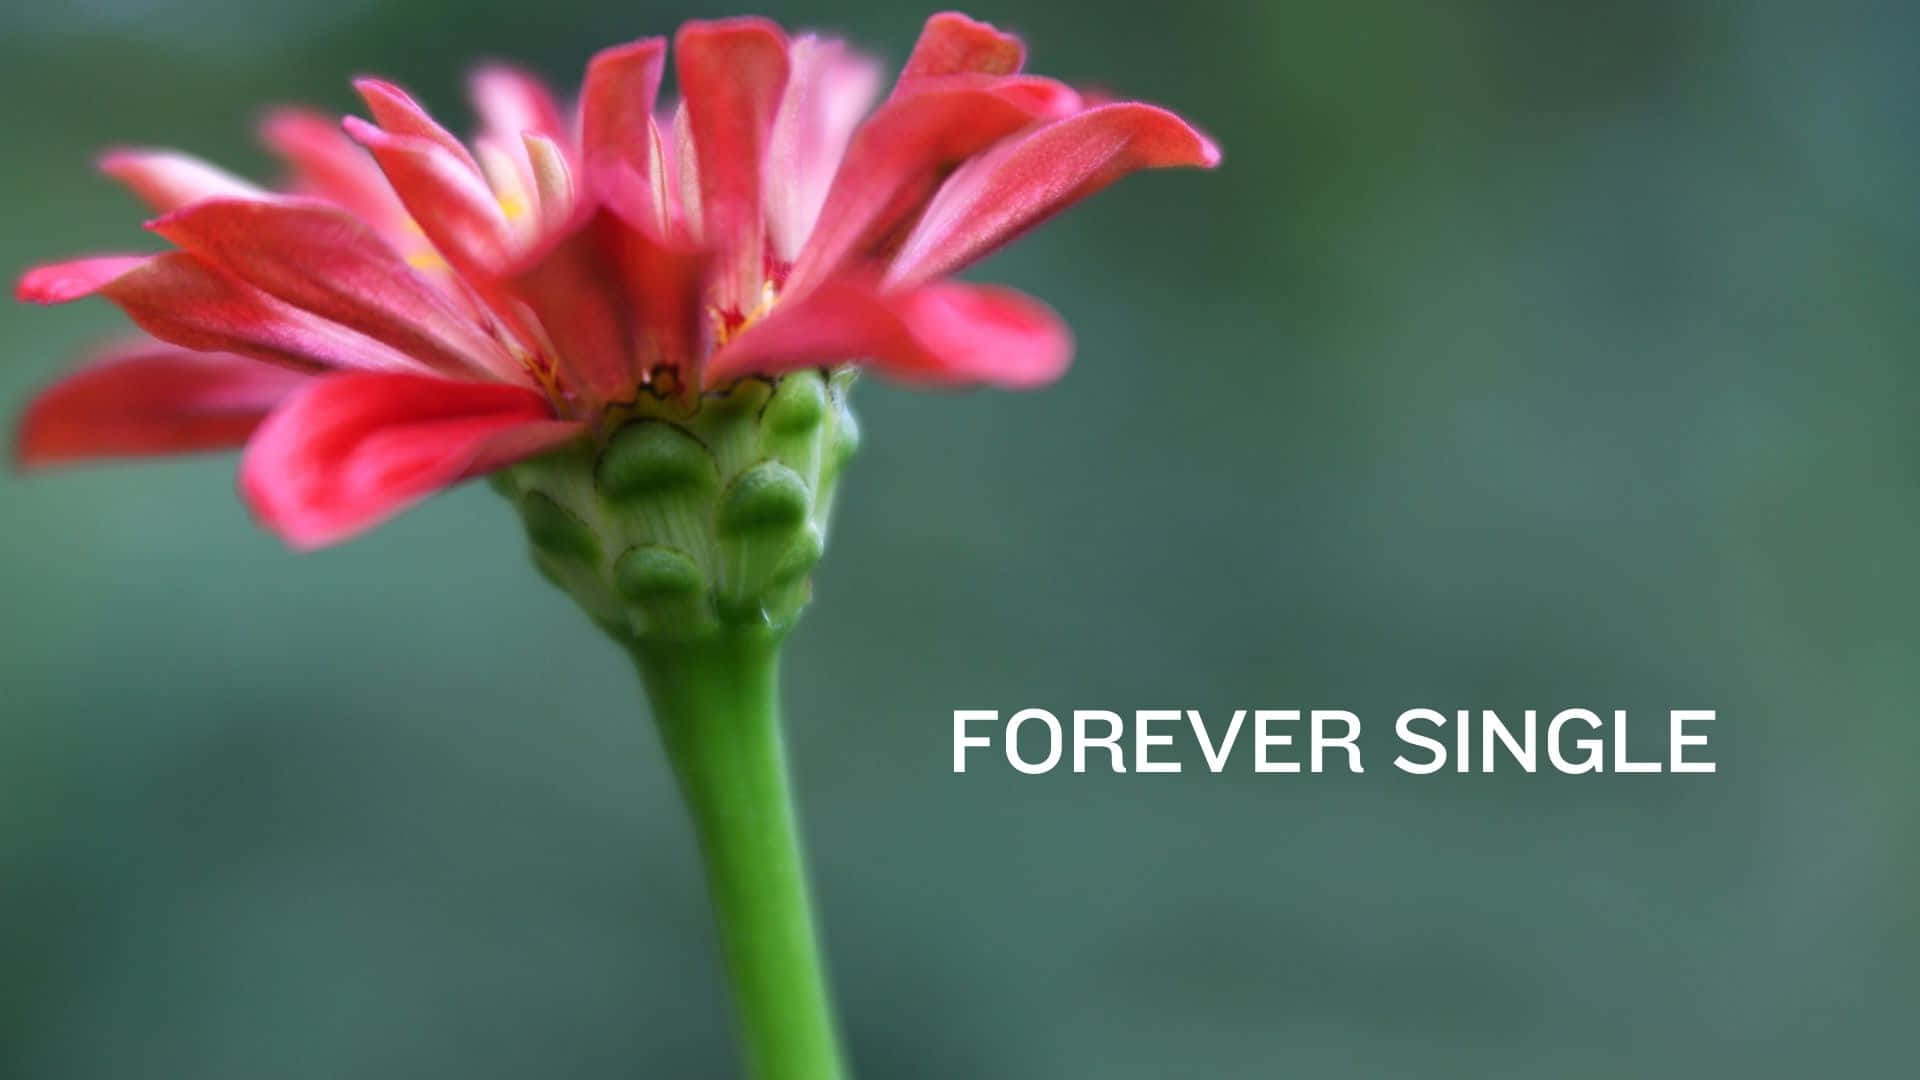 A Flower With The Words Forever Single